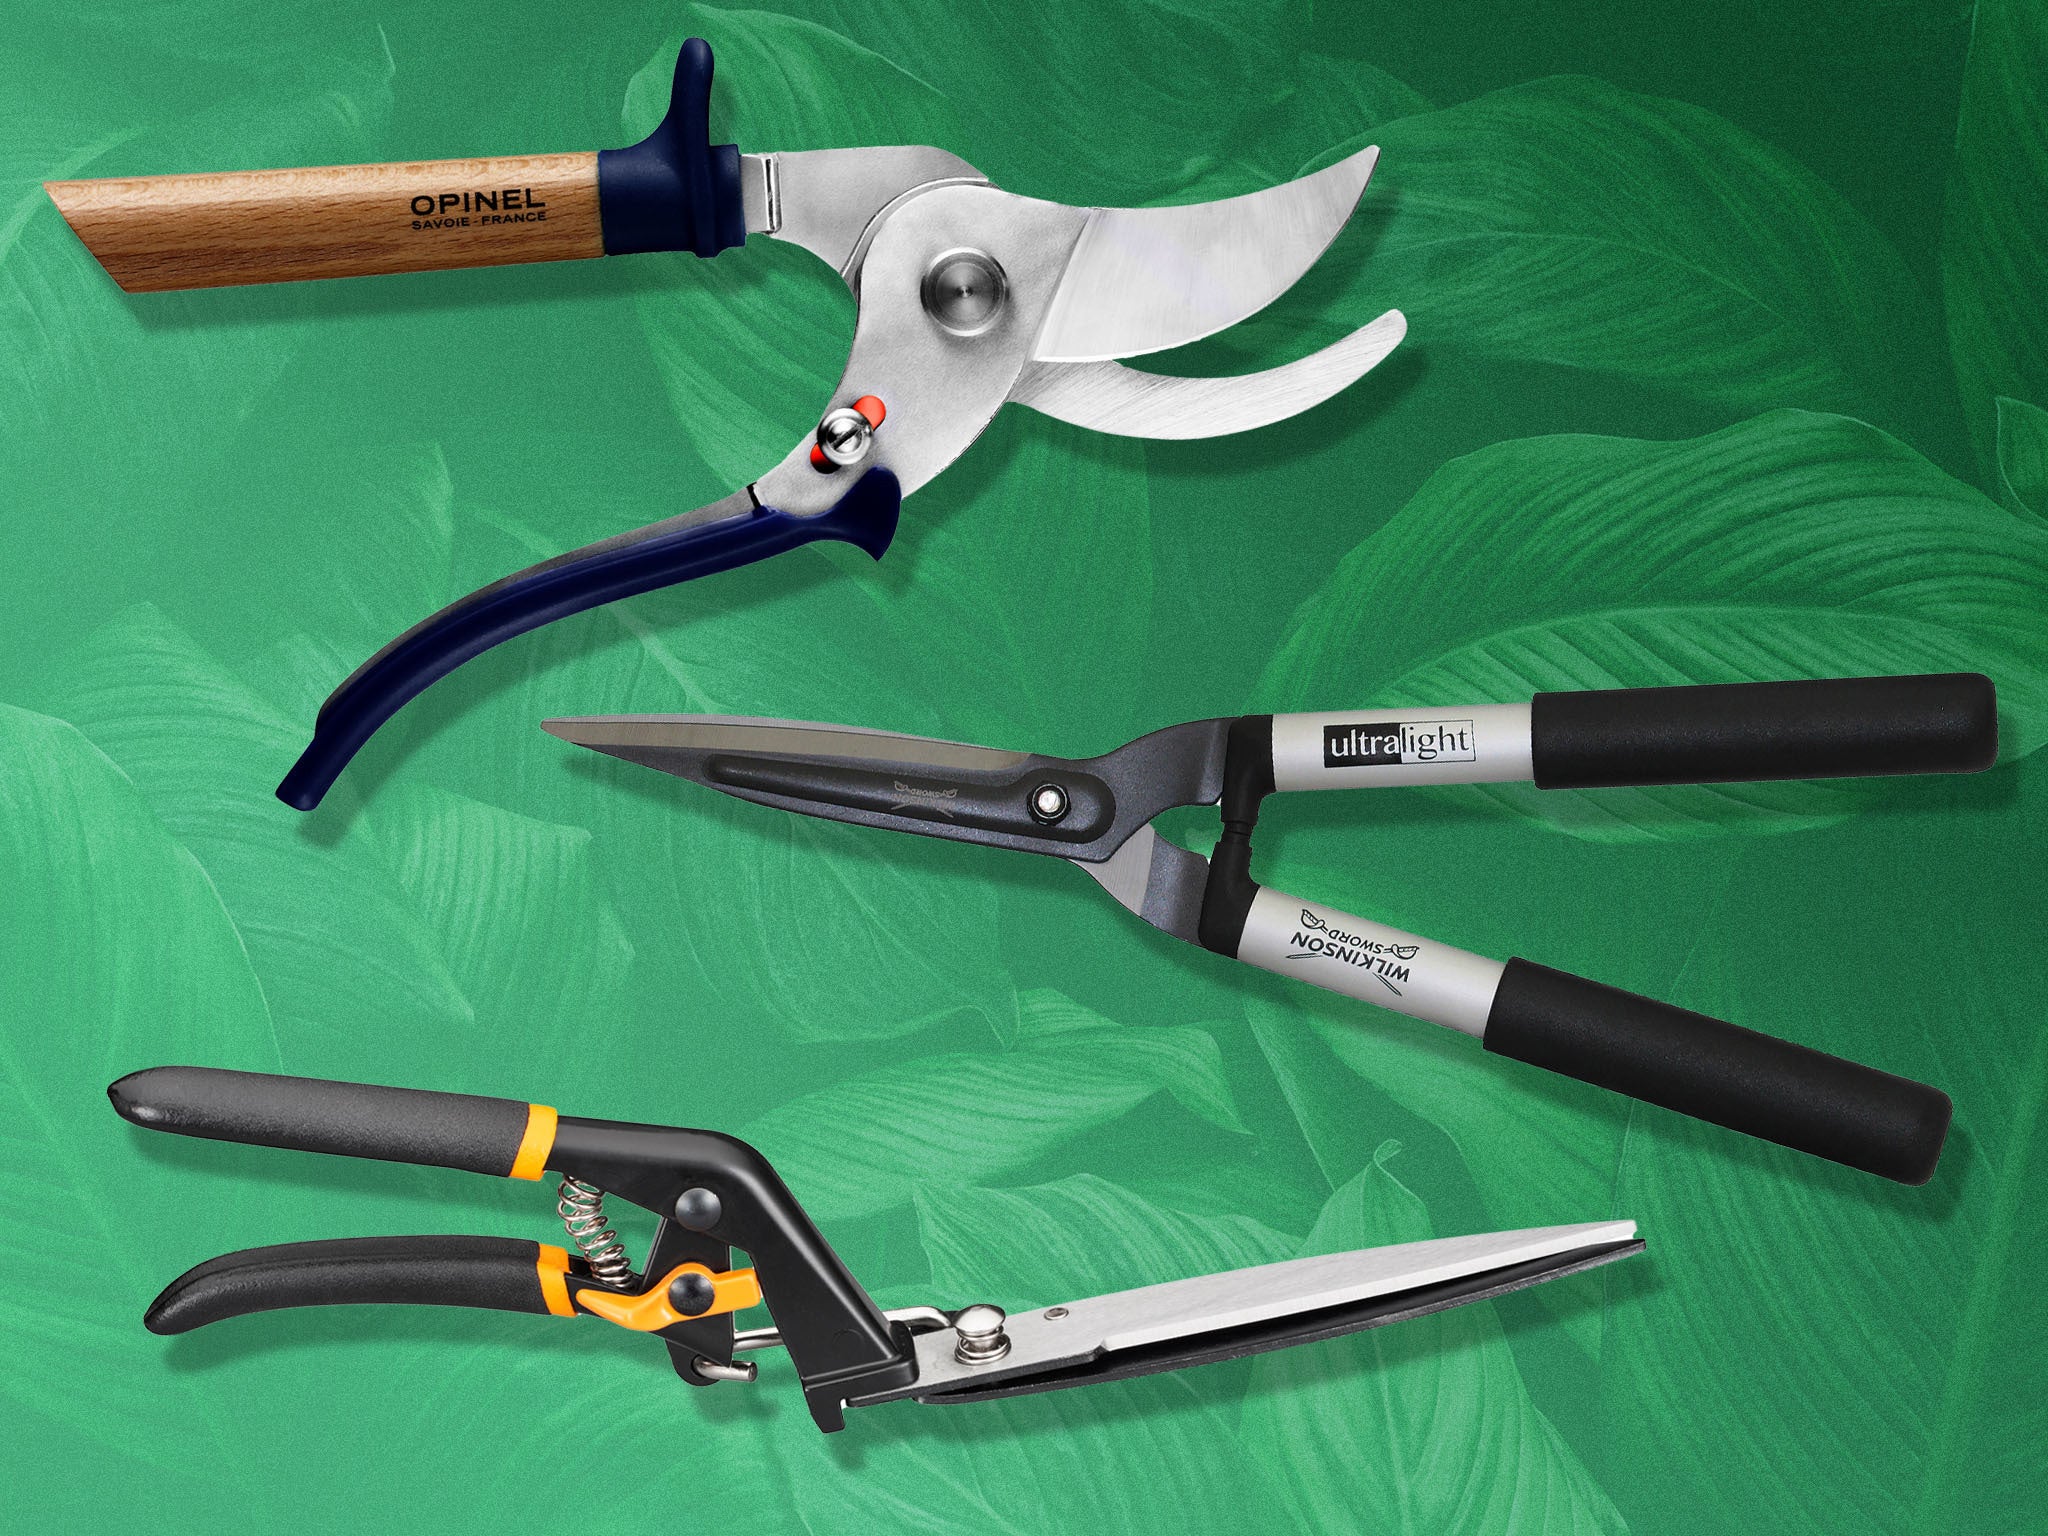 Best garden shears and secateurs for trimming grass, hedges and pruning ...